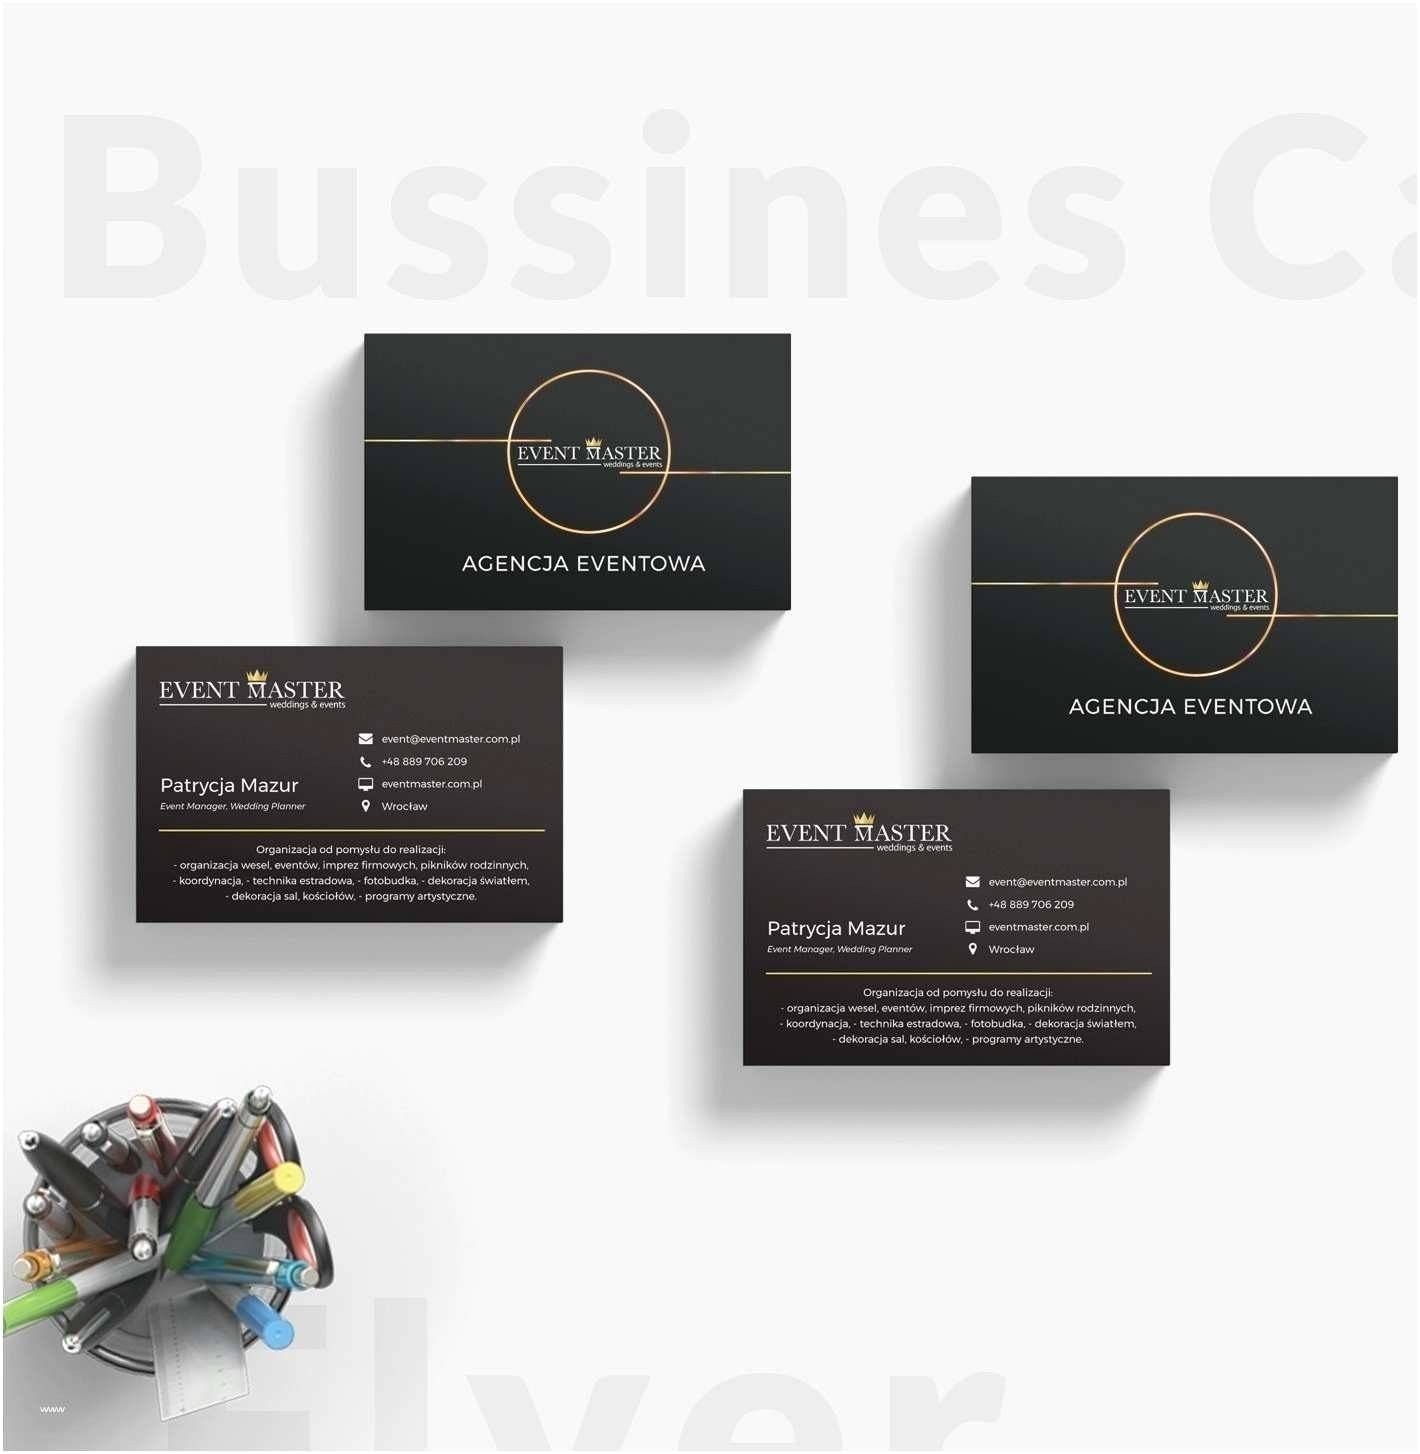 download can save at letter formats of patrick bateman business card template of patrick bateman business card template jpg